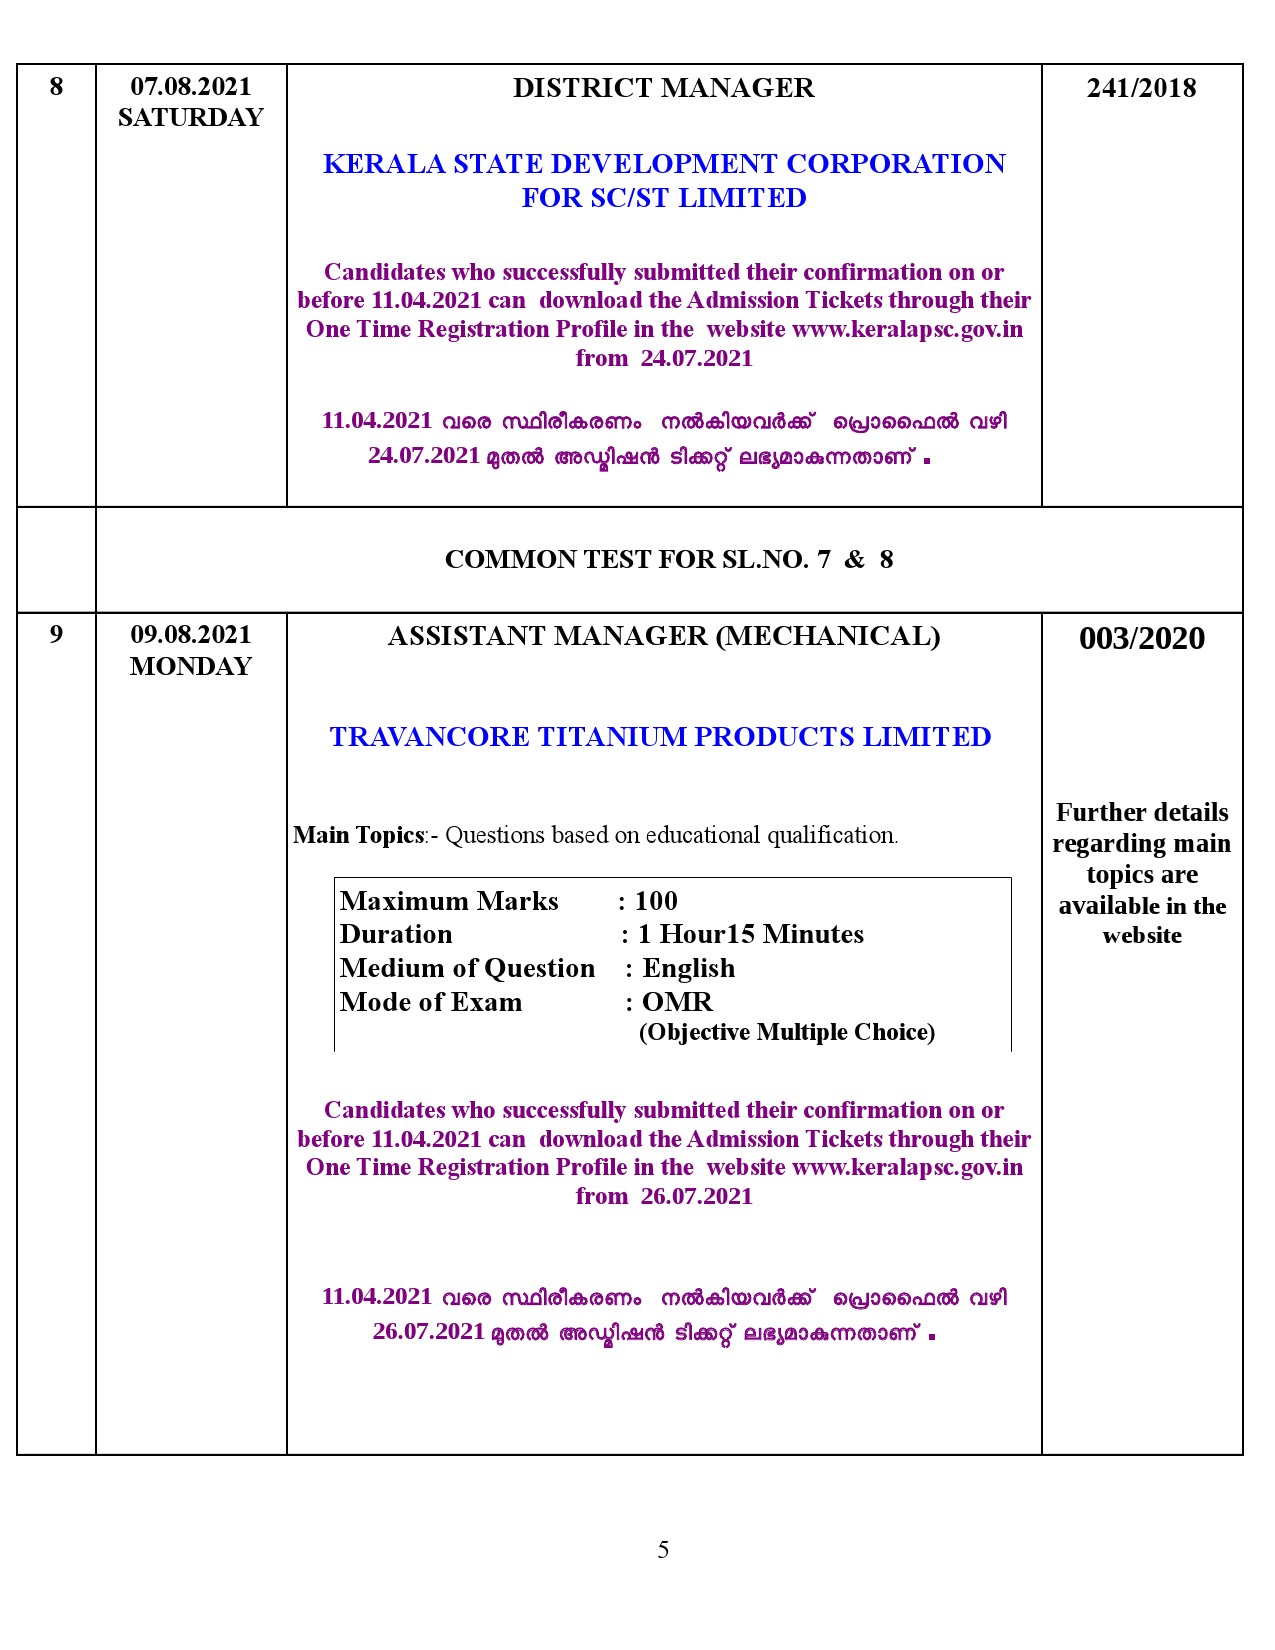 KPSC Examination Programme For The Month Of August 2021 - Notification Image 5